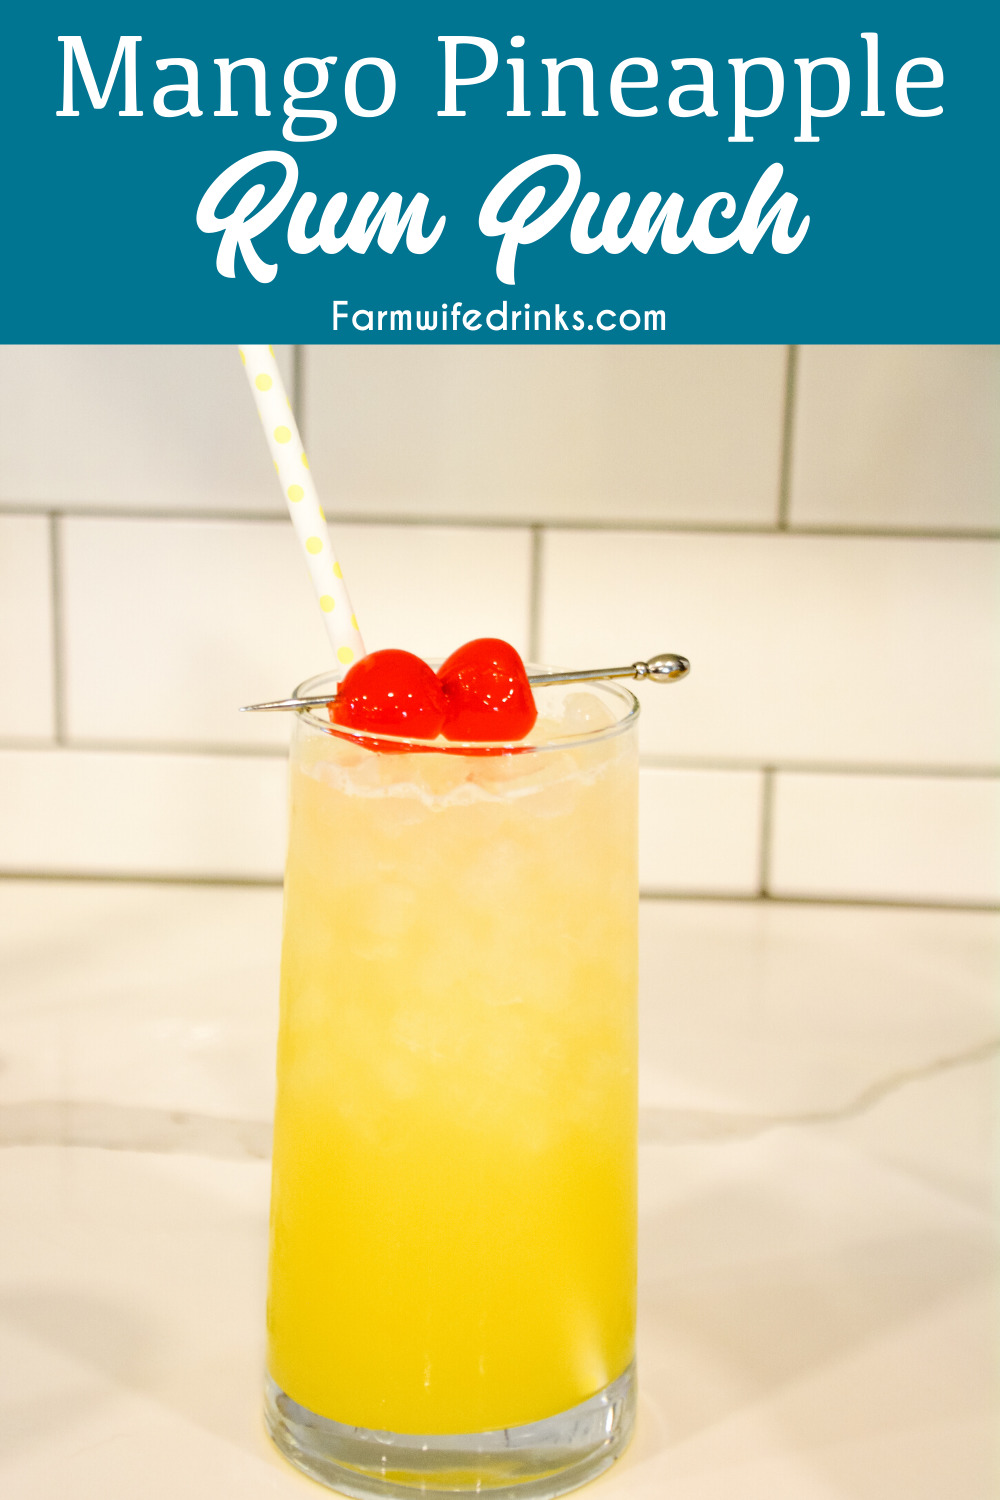 Mango Pineapple Rum Punch combines mango-pineapple juice with triple sec, Malibu rum, and white rum for a smooth Hawaiian rum cocktail that can be topped off with pineapple sparkling water.